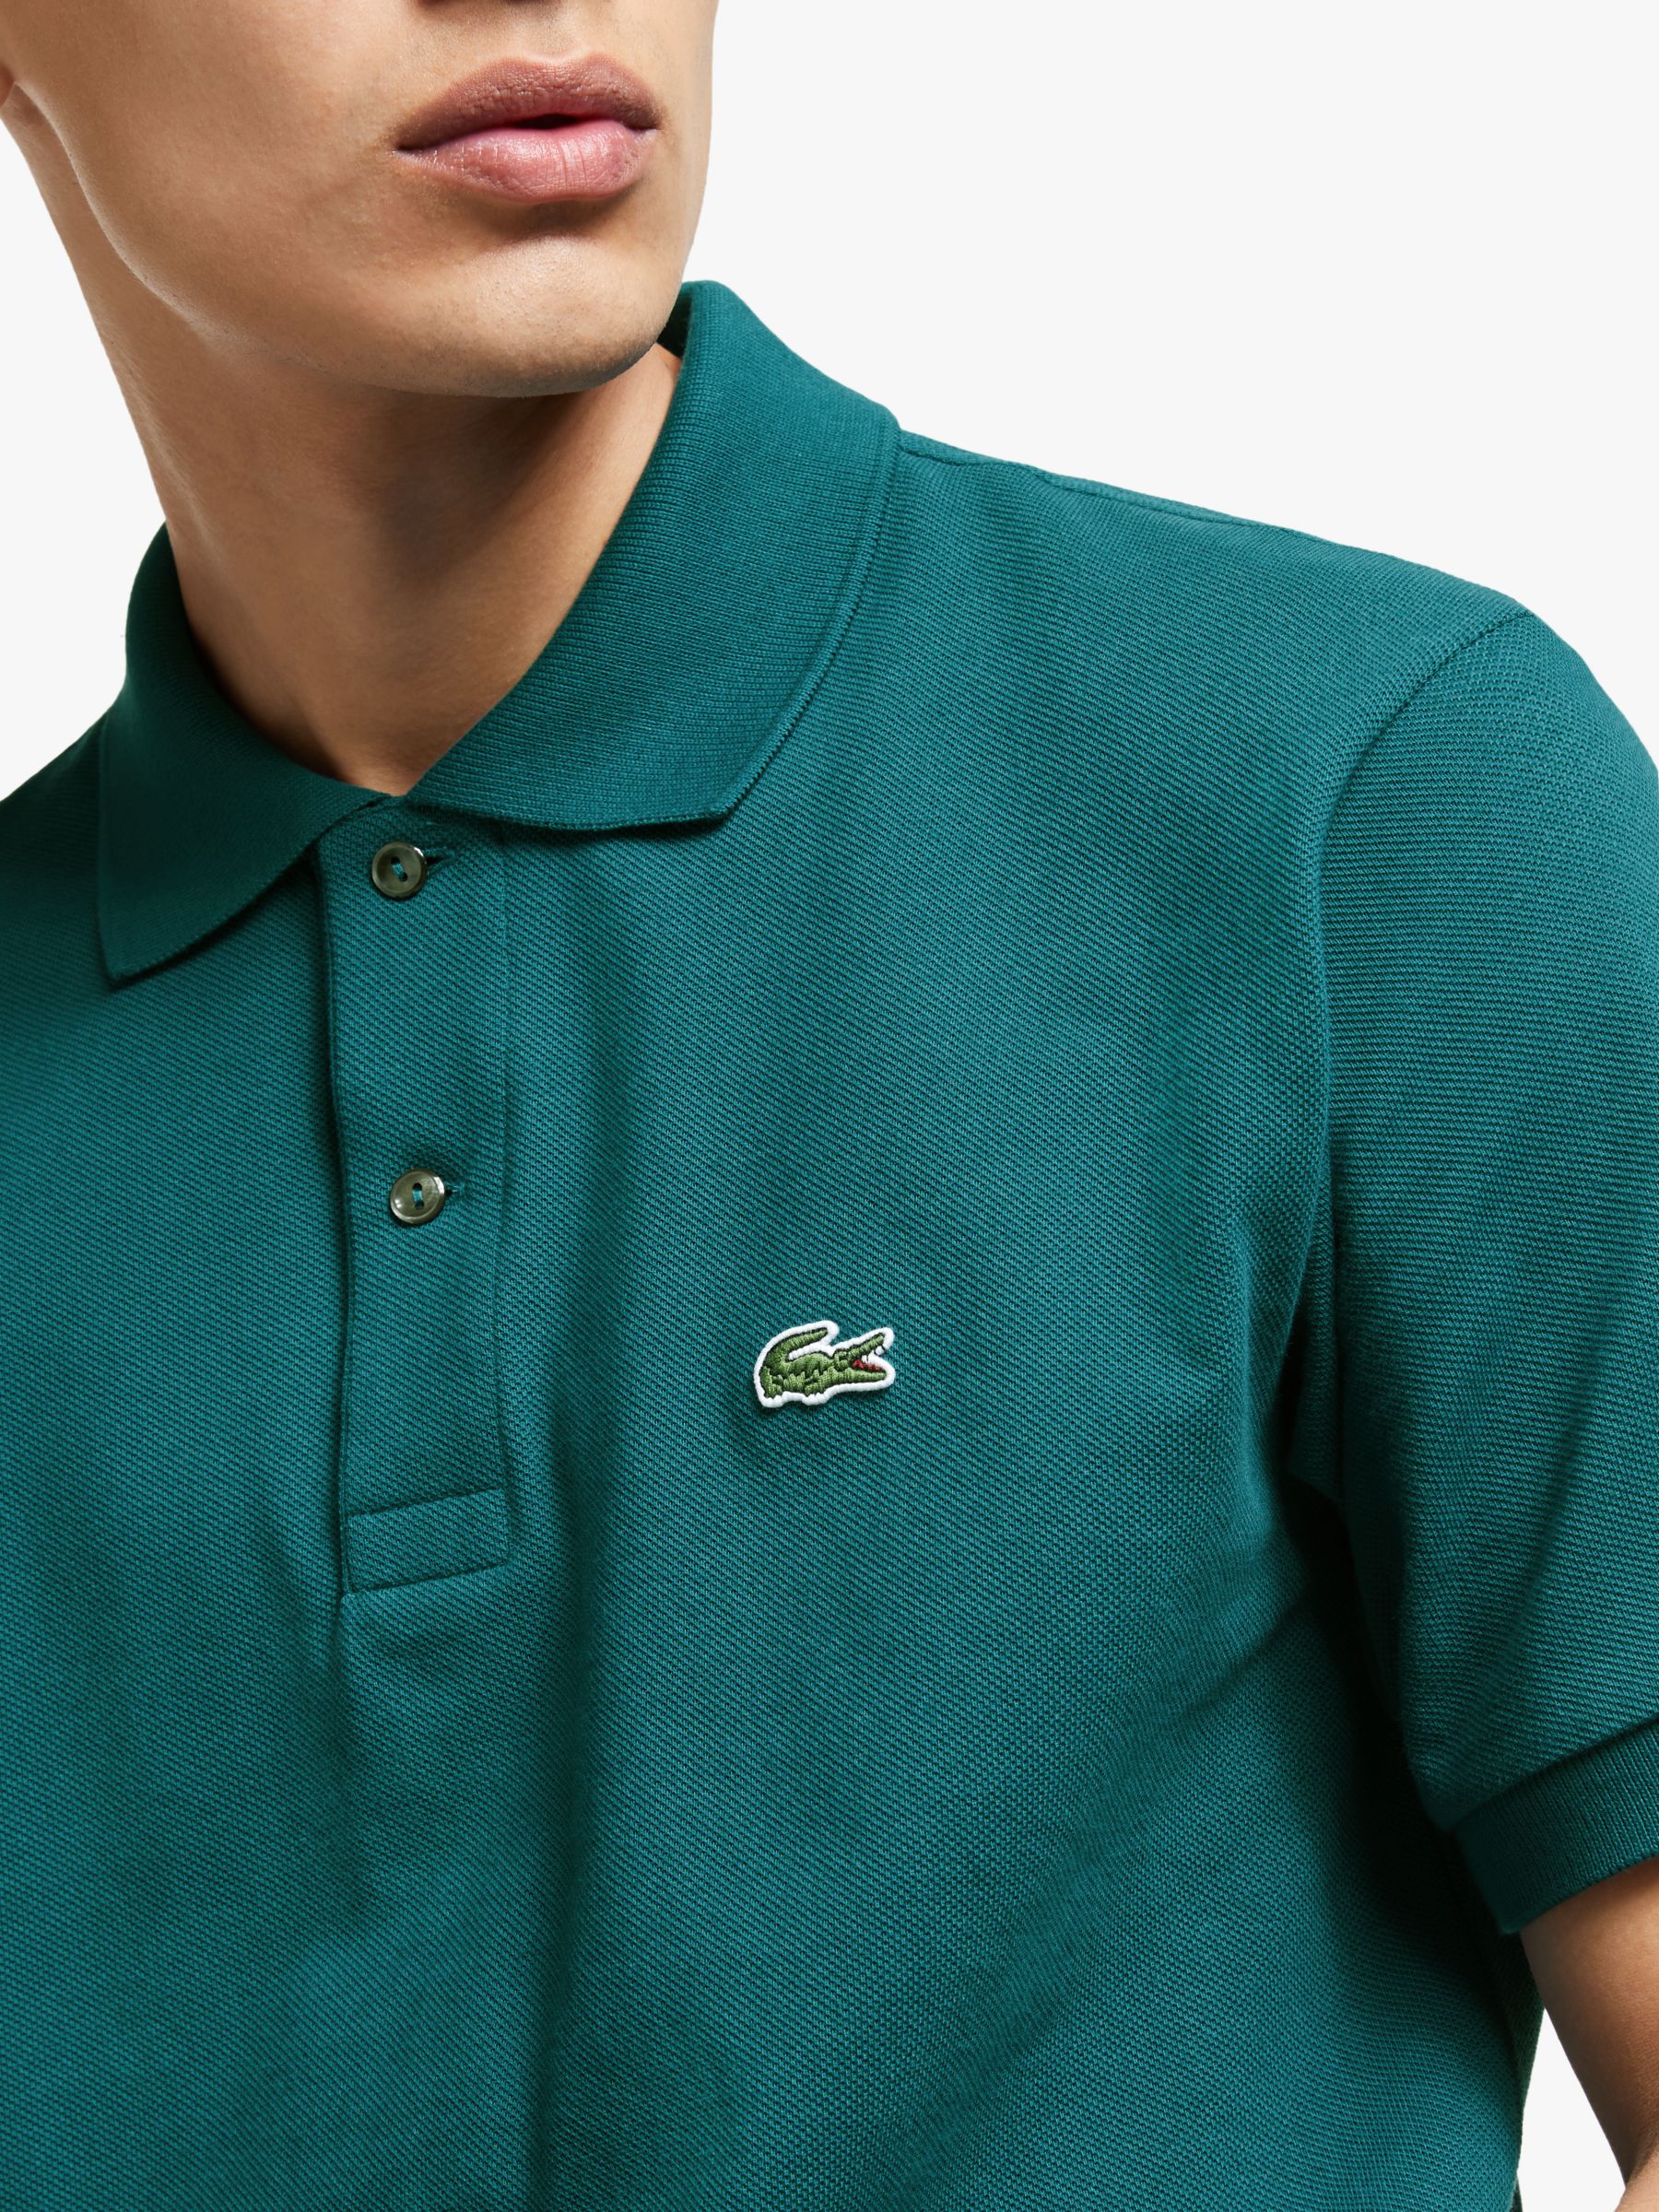 lacoste teal polo